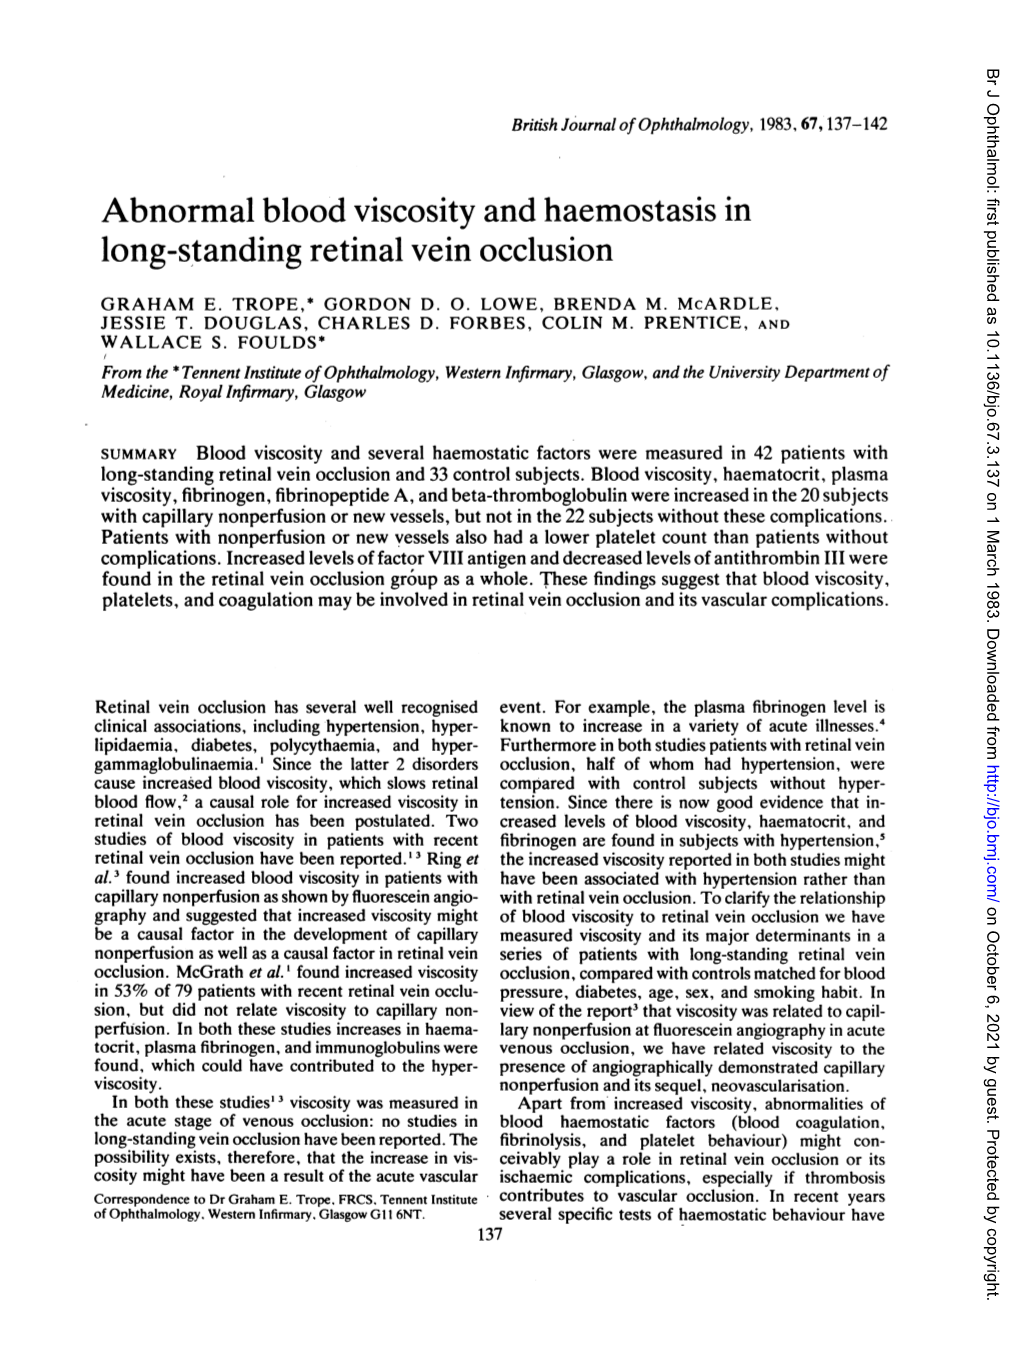 Abnormal Blood Viscosity and Haemostasis in Long-Standing Retinal Vein Occlusion